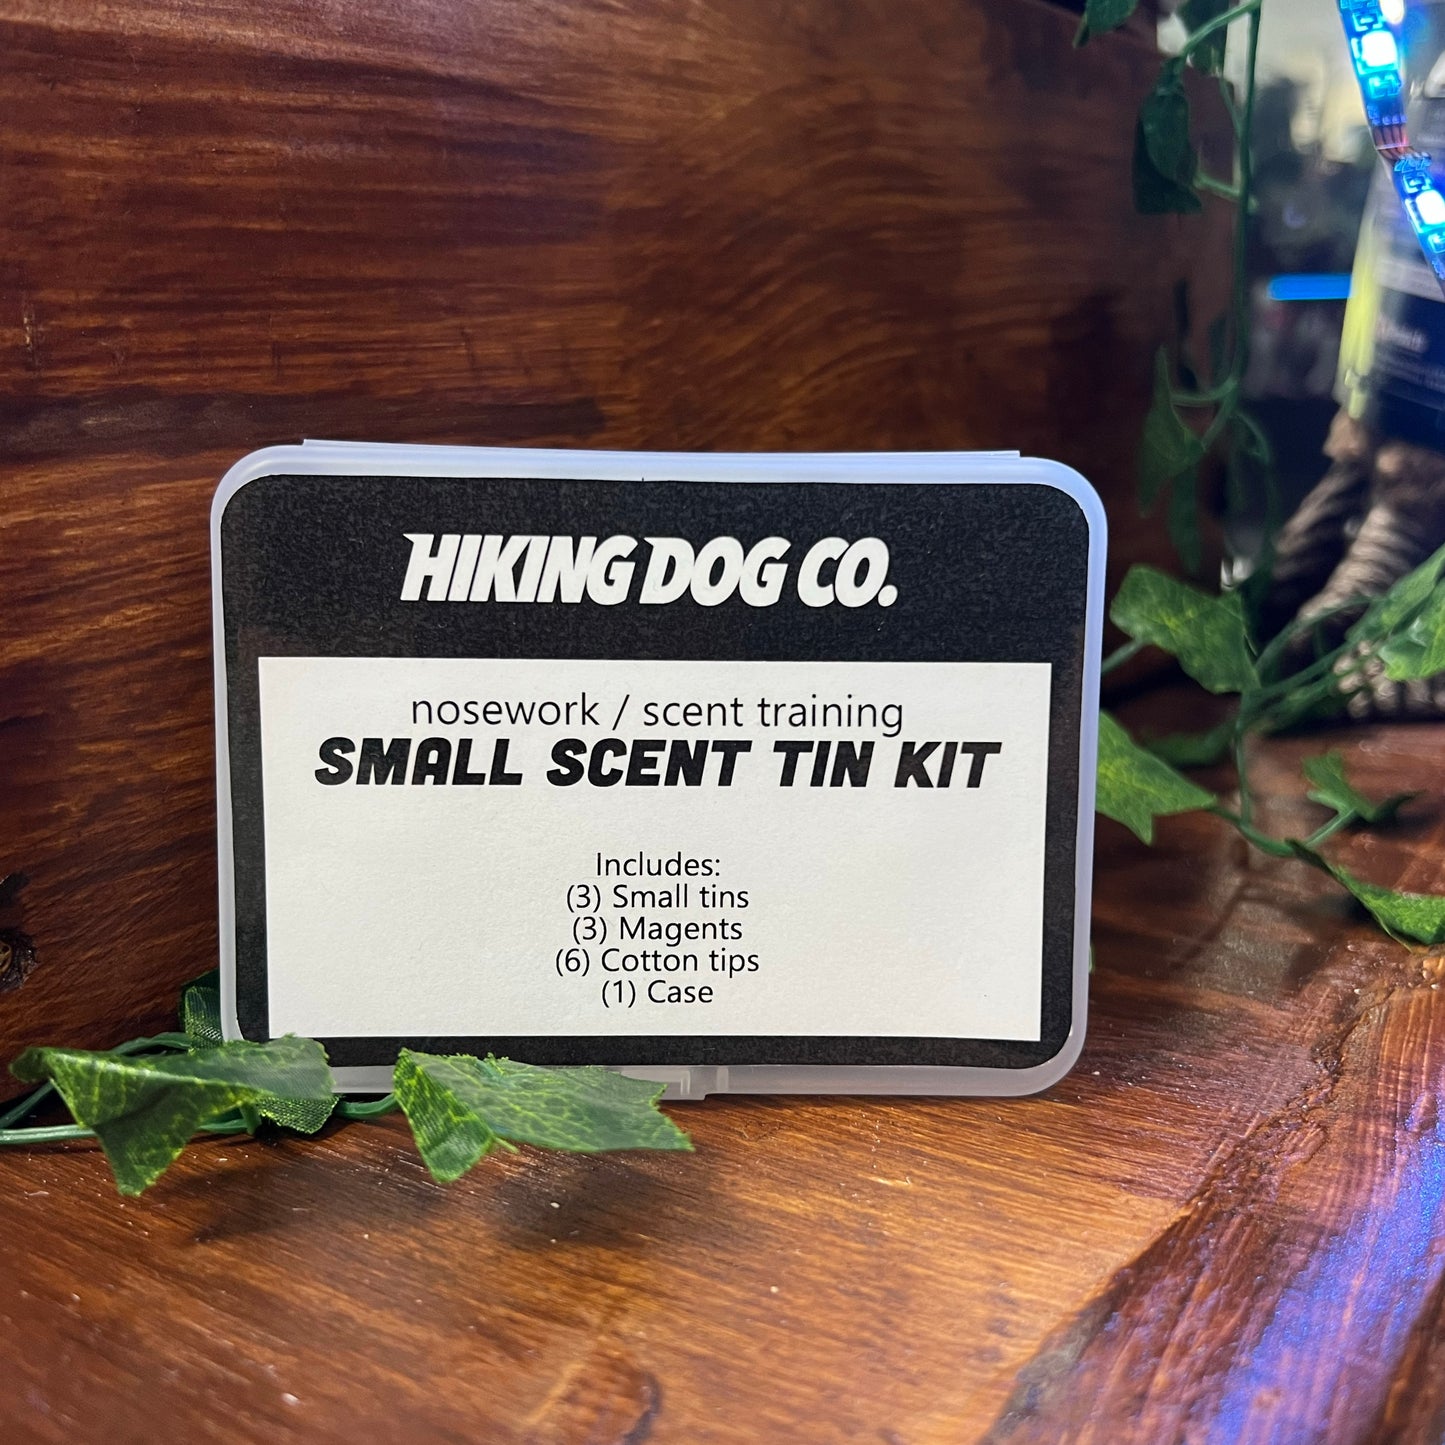 Small Scent Tin Kit by Hiking Dog Co.